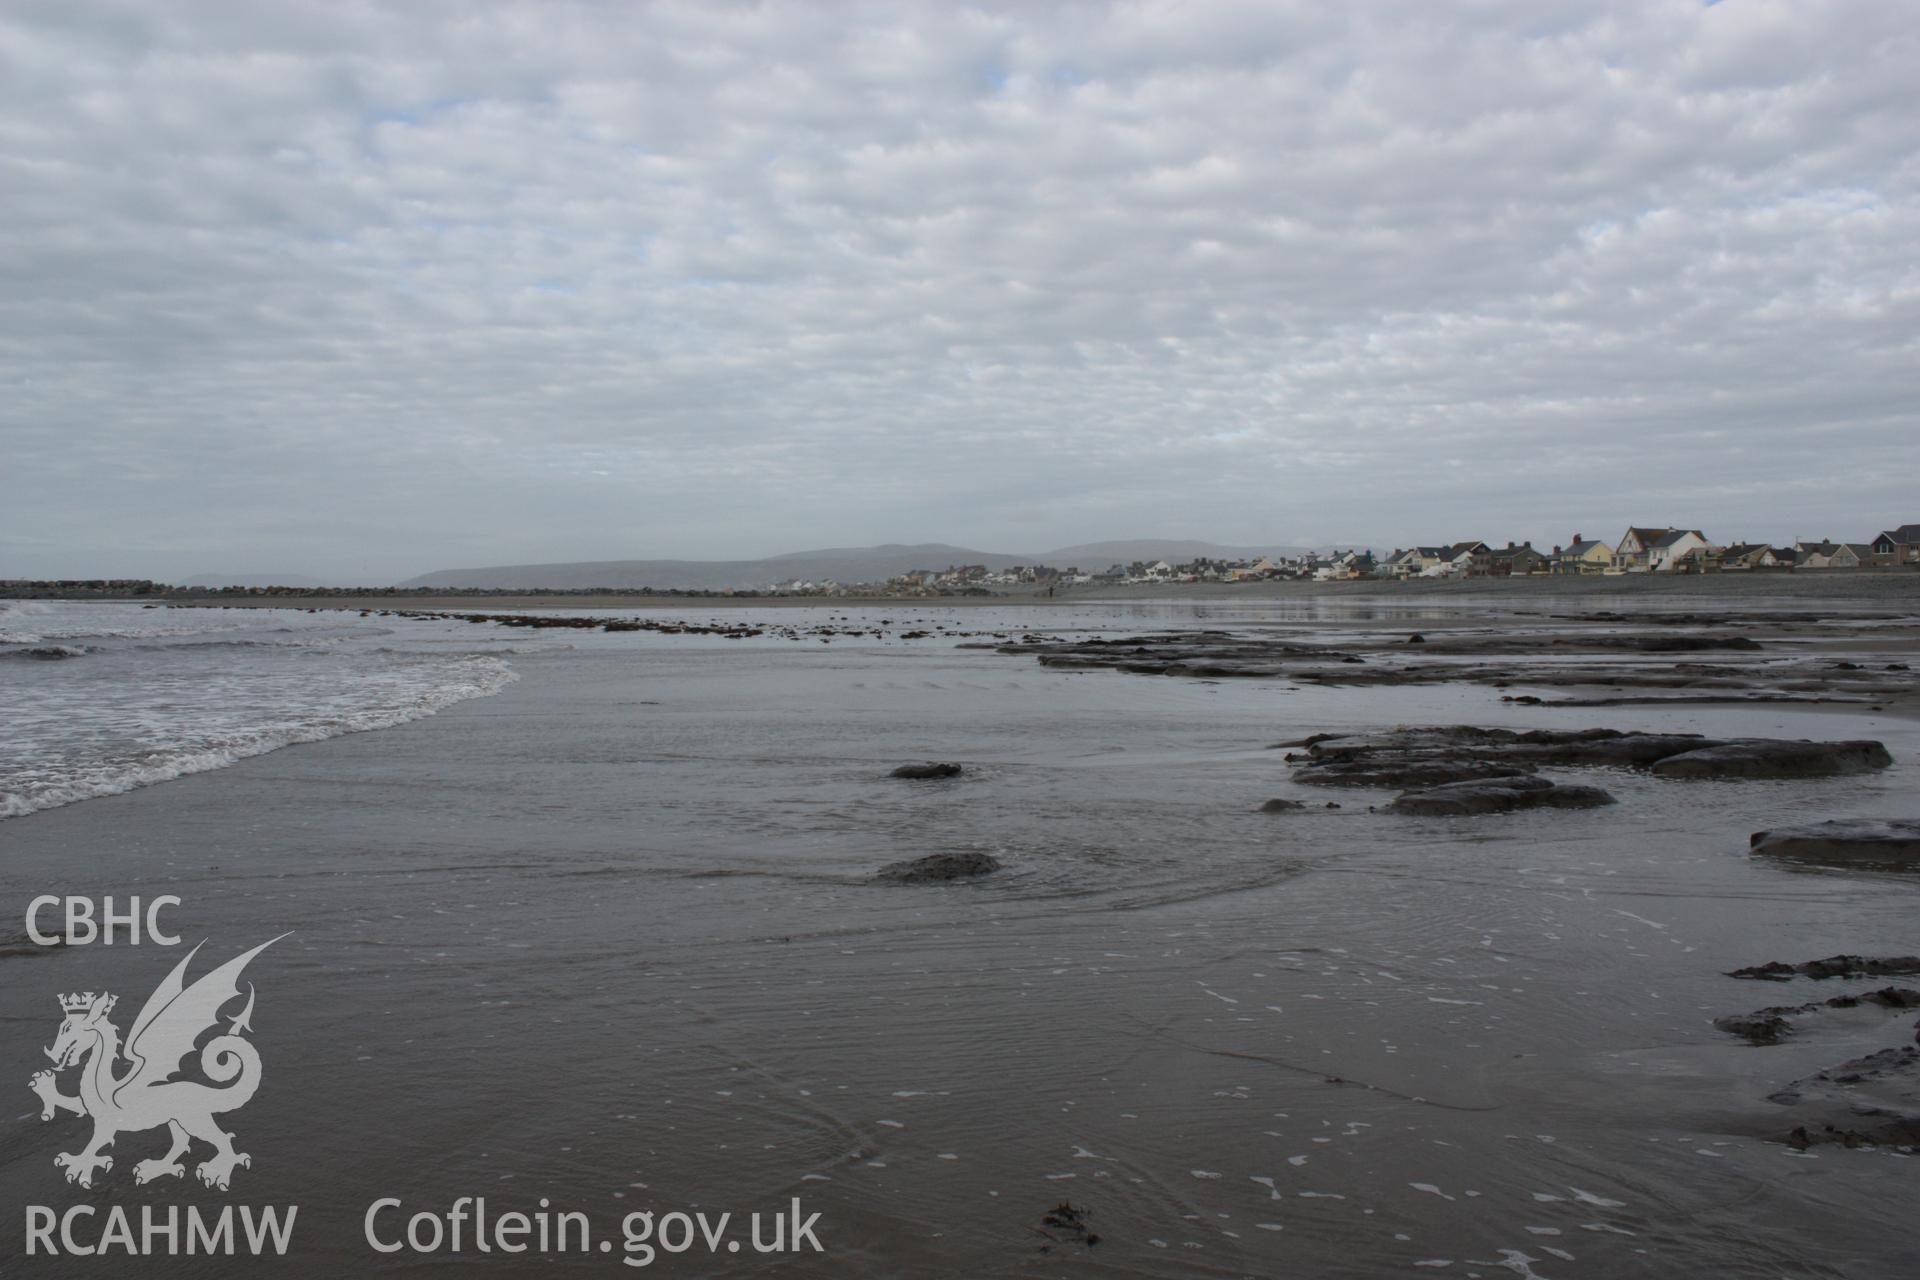 Borth submerged forest (between RNLI lifeboat station and upper Borth), looking northeast towards High Street and Ynyslas. Showing extent of peat exposures at low tide and temporary causeway leading to artificial reef (centre left-centre).